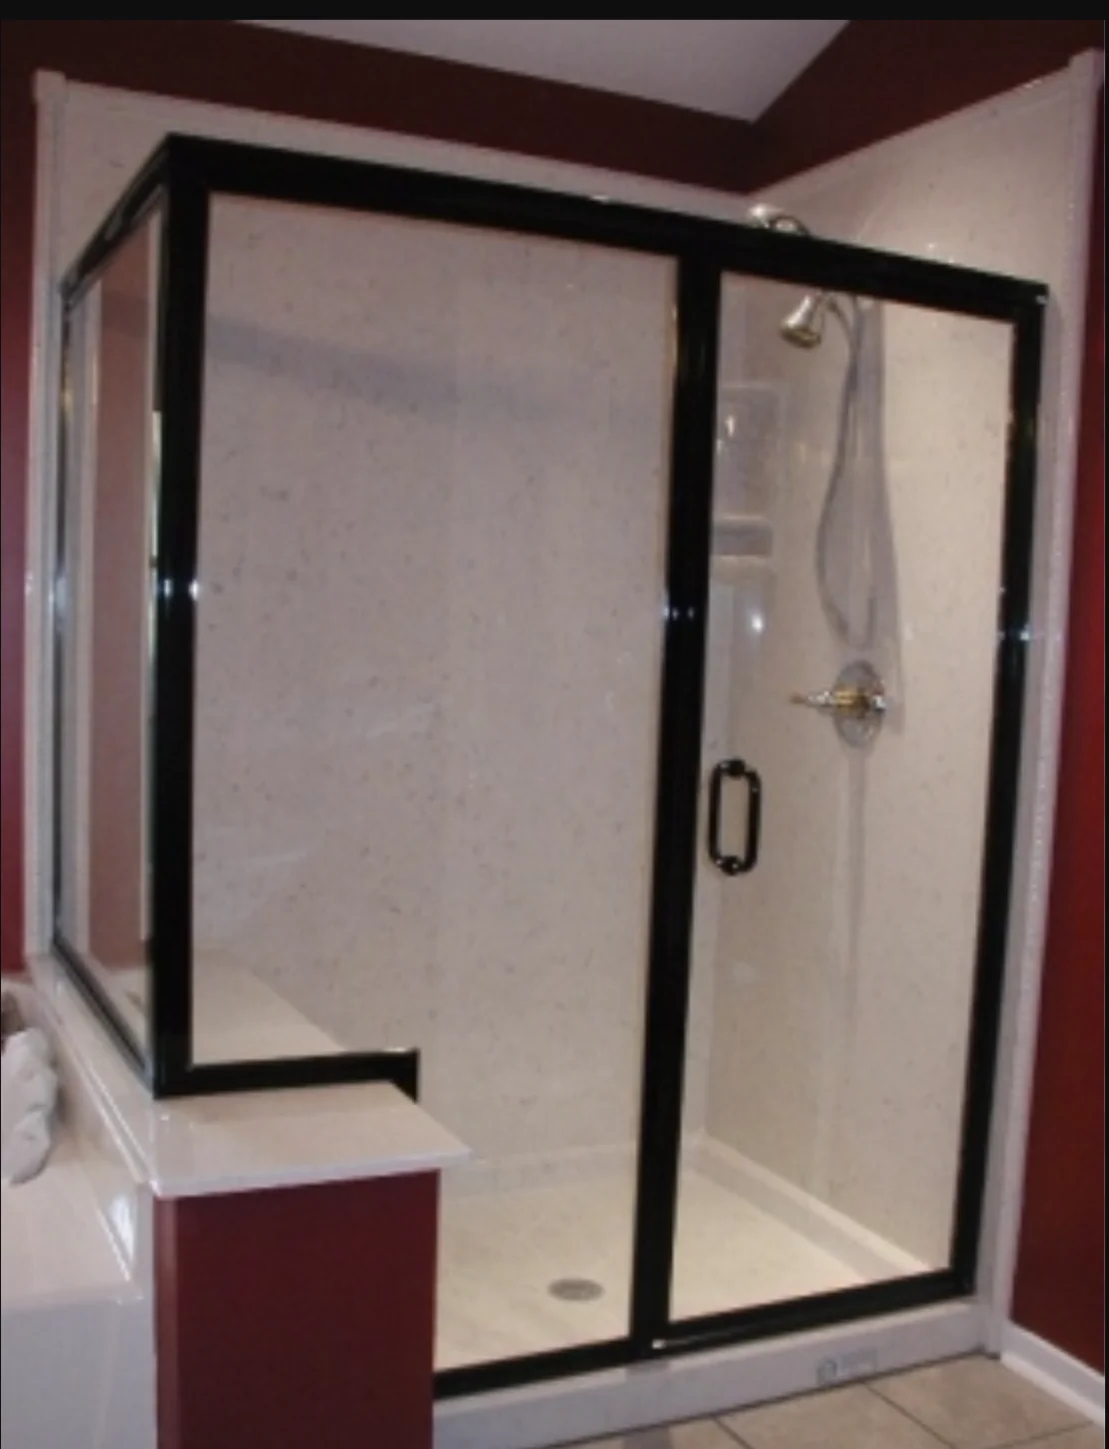 AQ Glass offers seamless designs of the custom framed shower doors with guaranteed installation service under an experienced team.